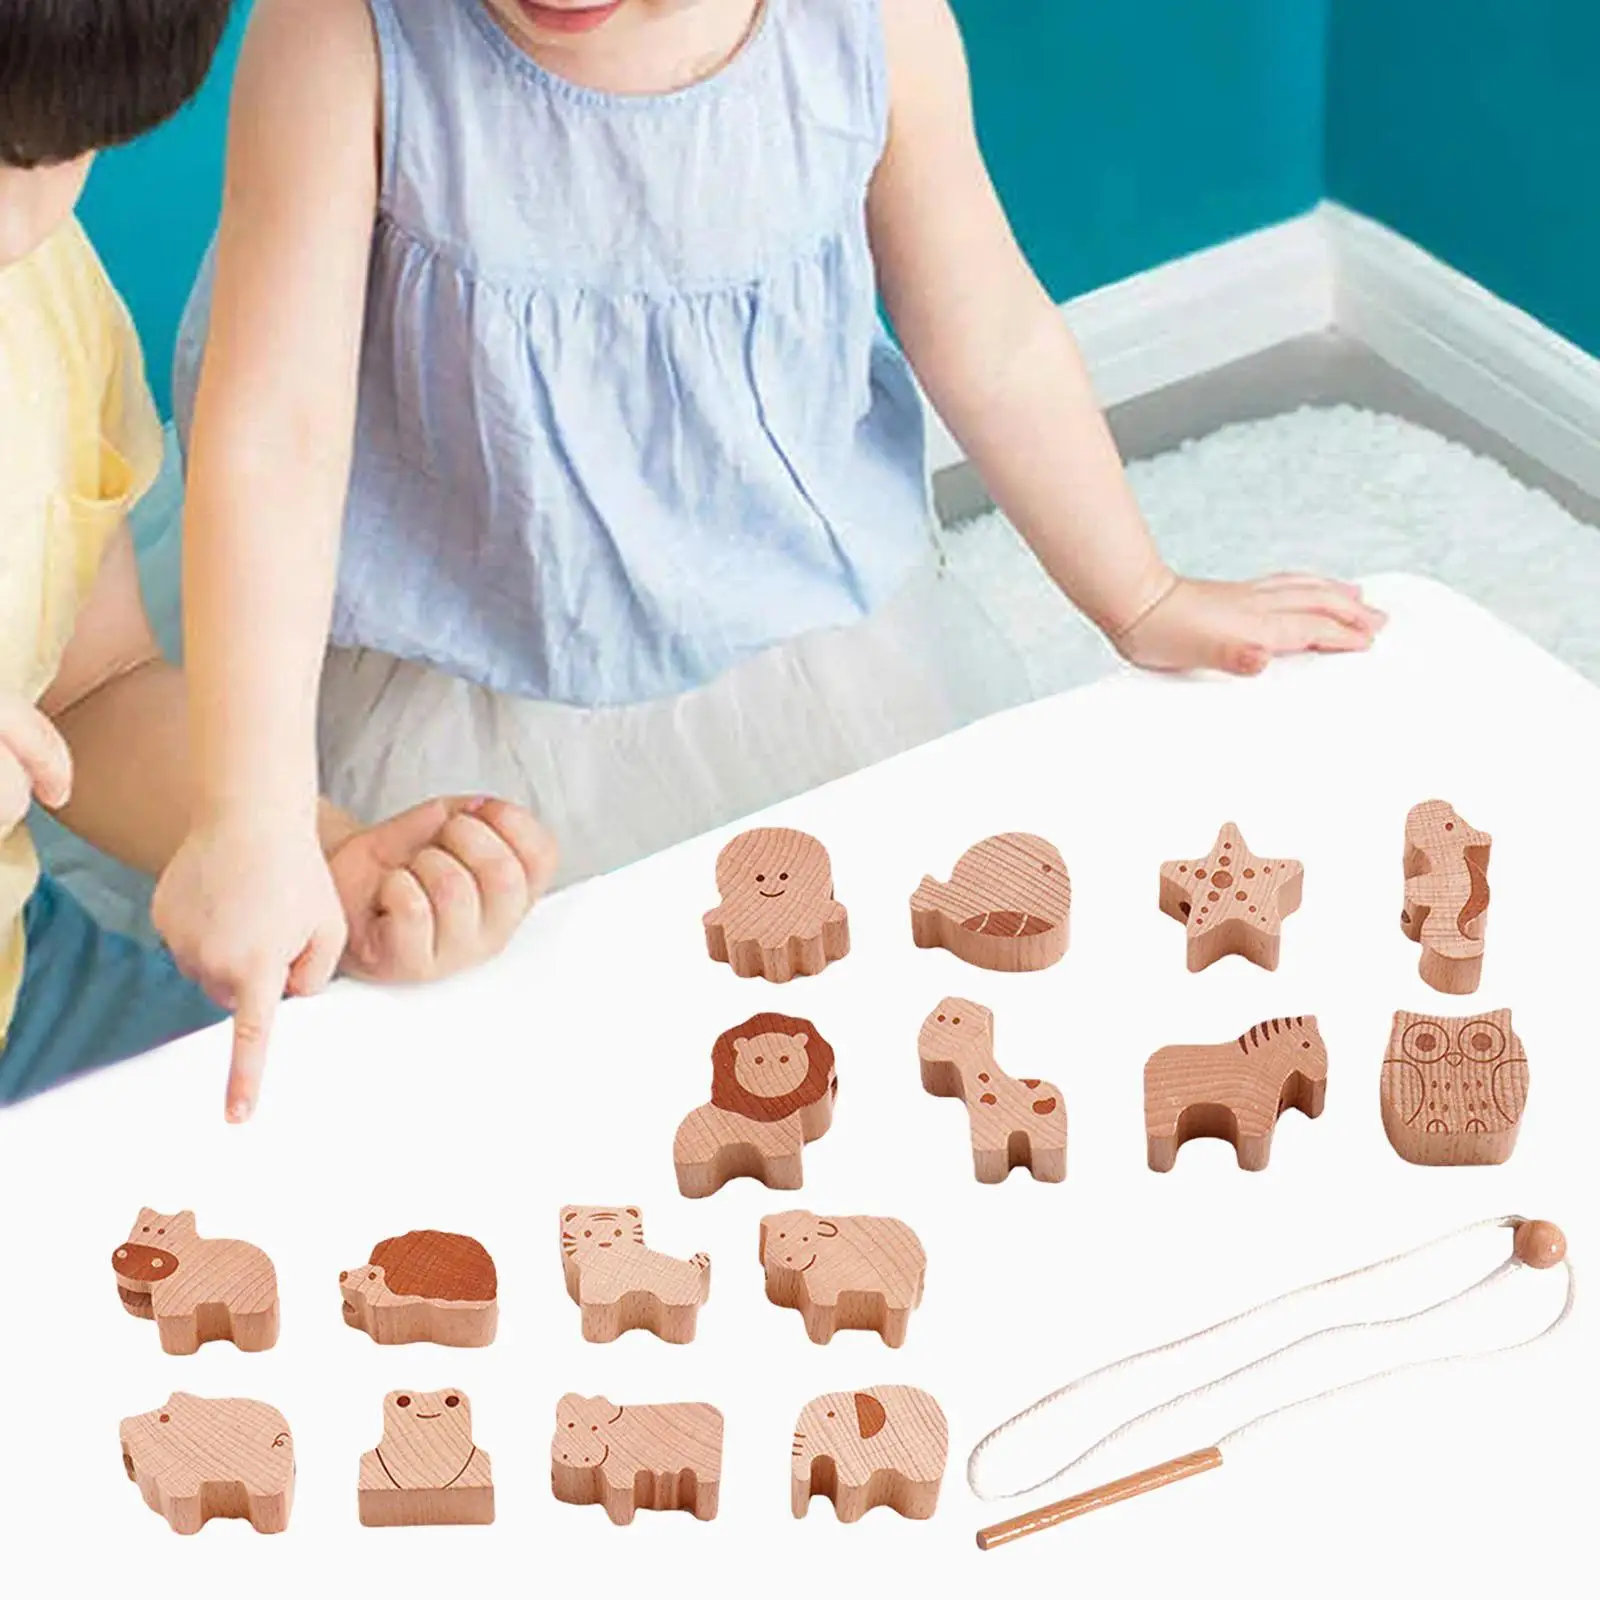 Wooden Lacing Beads Toys Fine Motor Skills Preschool Activities Animals Blocks Learning Toys for Children Toddlers Holiday Gifts